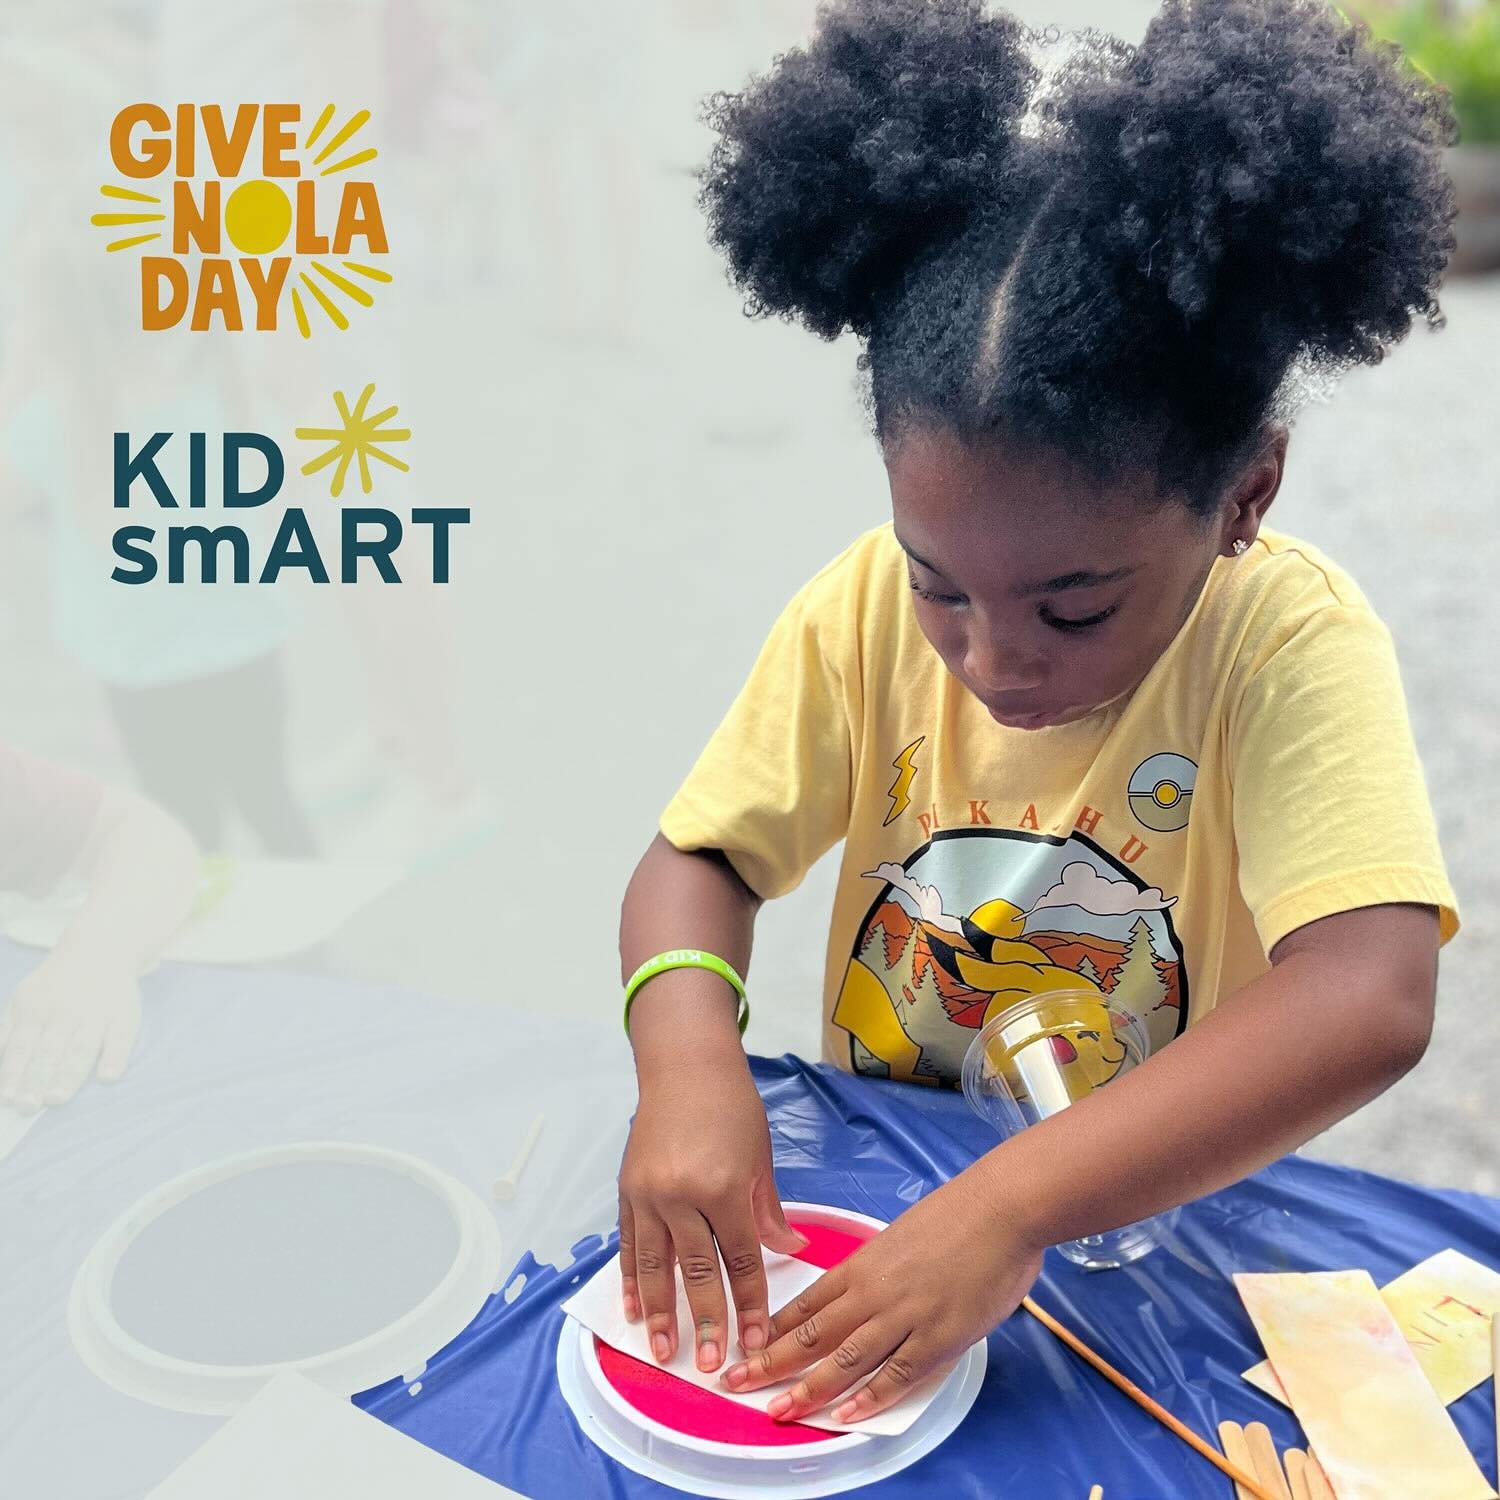 GiveNOLA Day is this Tuesday! But you don&rsquo;t have to wait; you can donate right now! A gift to KID smART provides essential arts education to children, fostering creativity and confidence. Donate at the link in our bio!